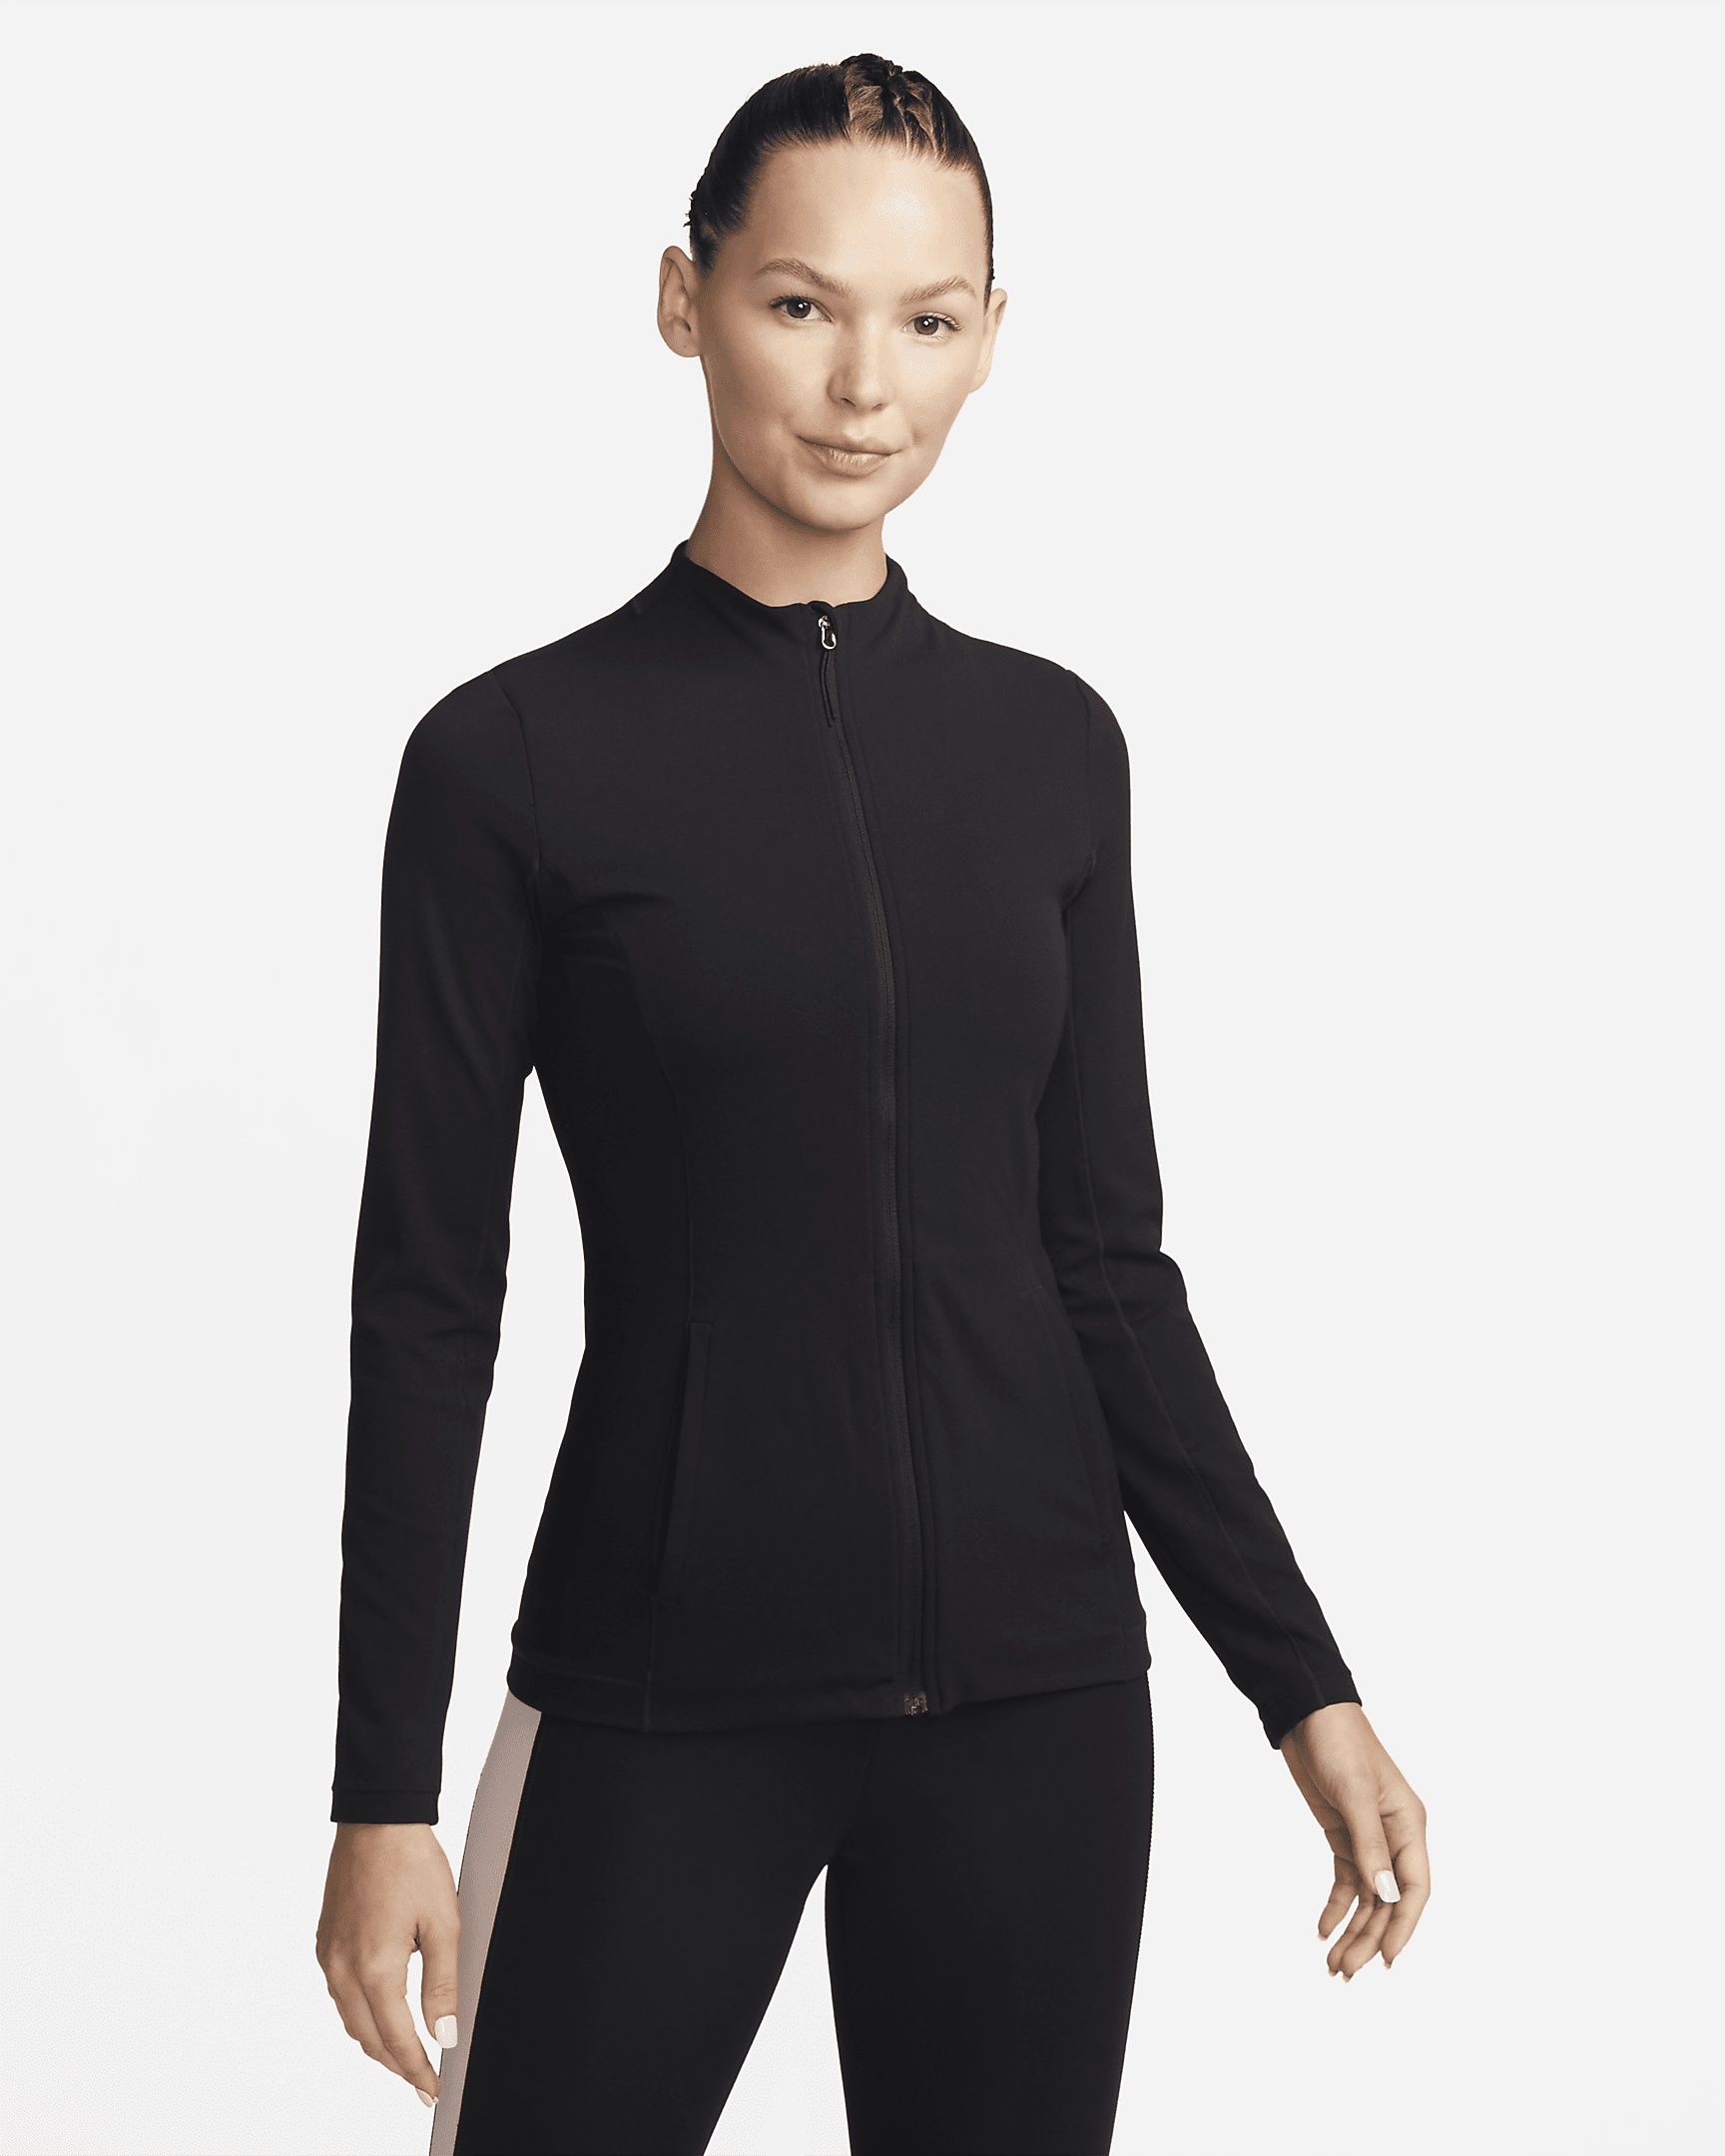 Nike Yoga Dri-FIT Luxe Women's Fitted Jacket - 1